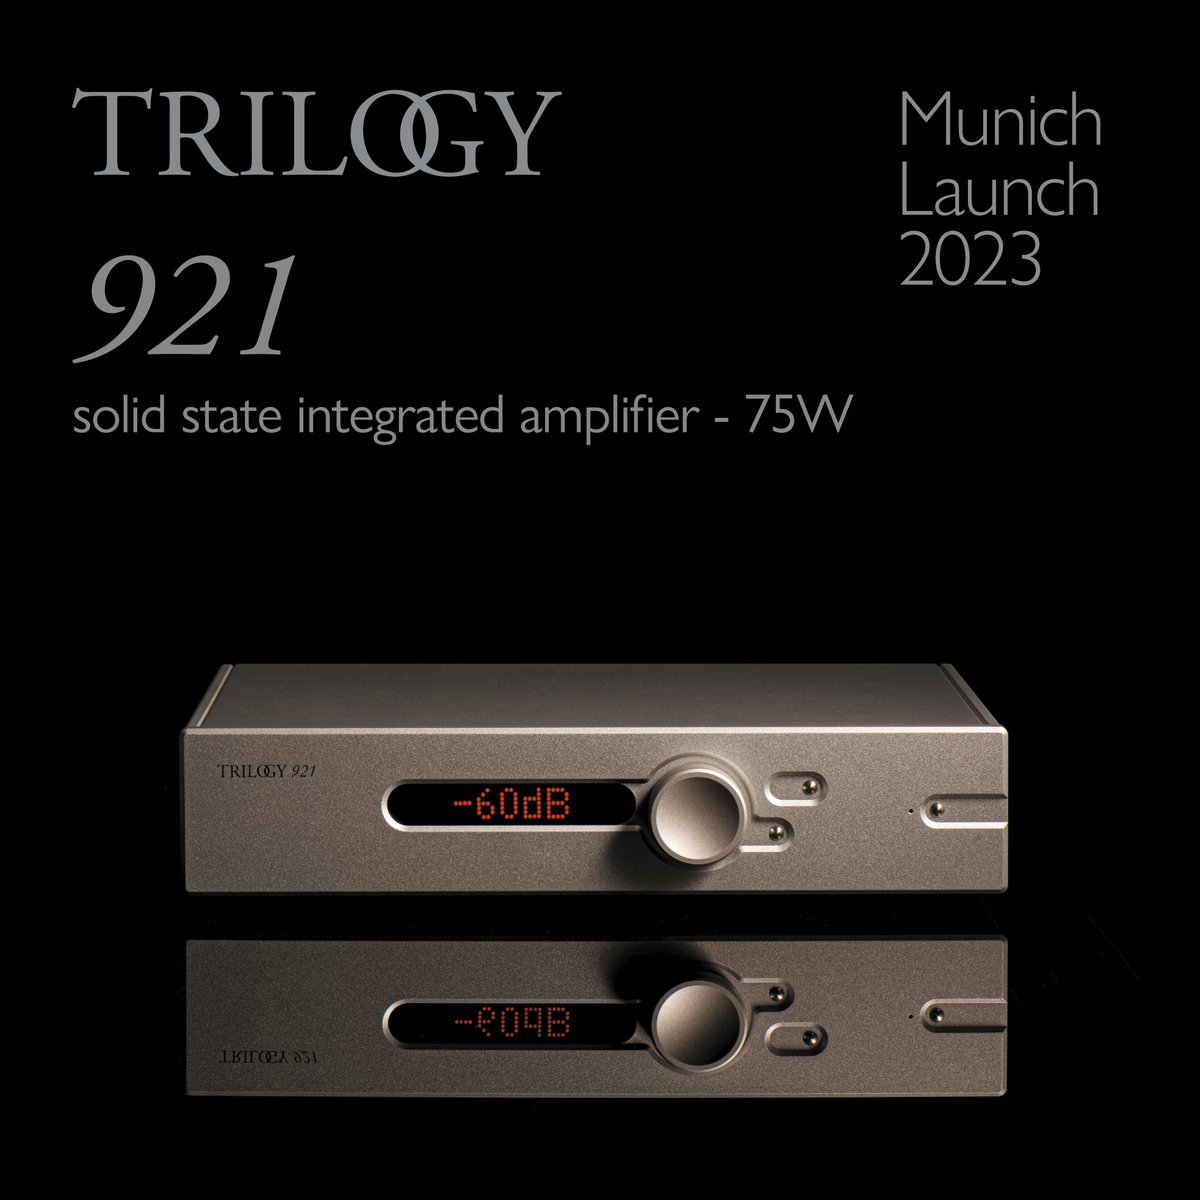 New product launch. Our 921 - Trilogy's solid state integrated. All the musicality of a valve design in a perfect form. Defying convention, again. We look forward to seeing you.
We're at A 4.2, F224. MAY 18 TO 21, 2023  #audiophile #highendhifi #munichhighend2023 #madeinbritain